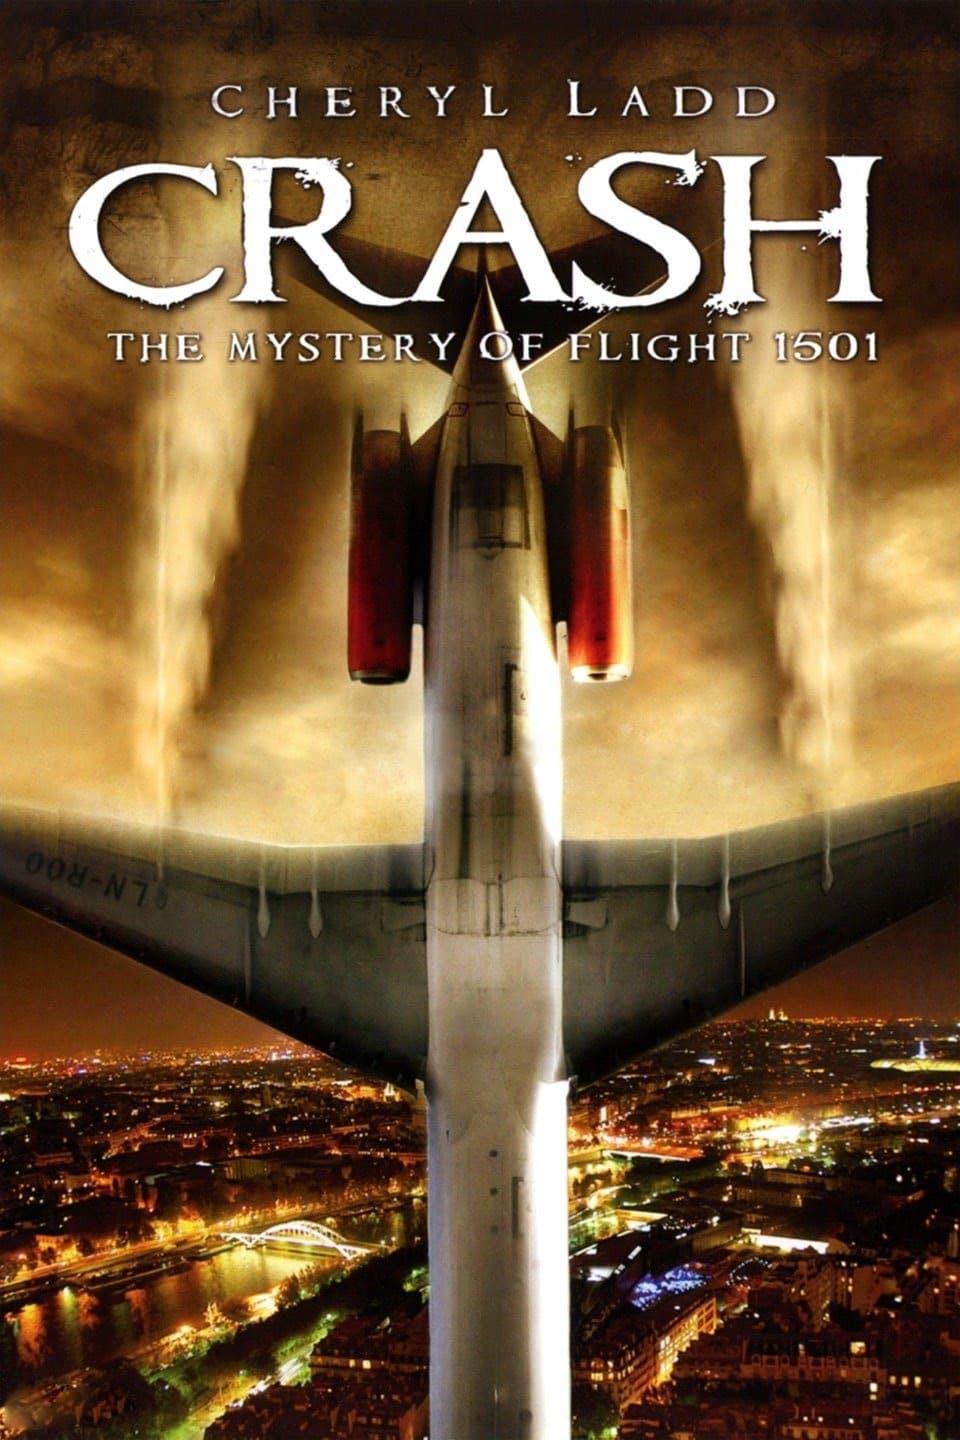 Crash: The Mystery of Flight 1501 poster